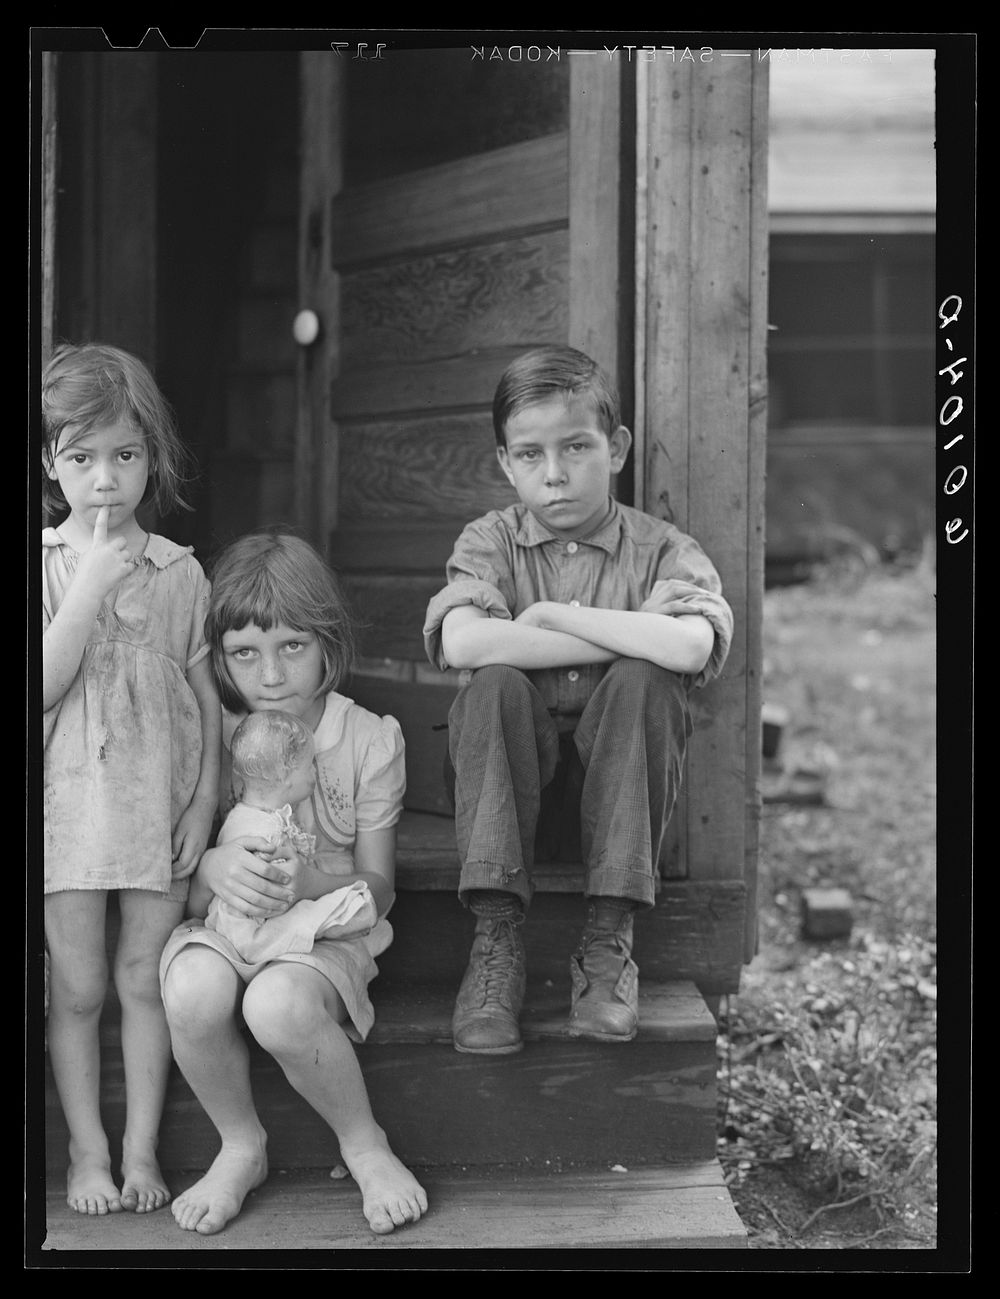 [Untitled photo, possibly related to: Children living in  area. Elkins, West Virginia]. Sourced from the Library of Congress.